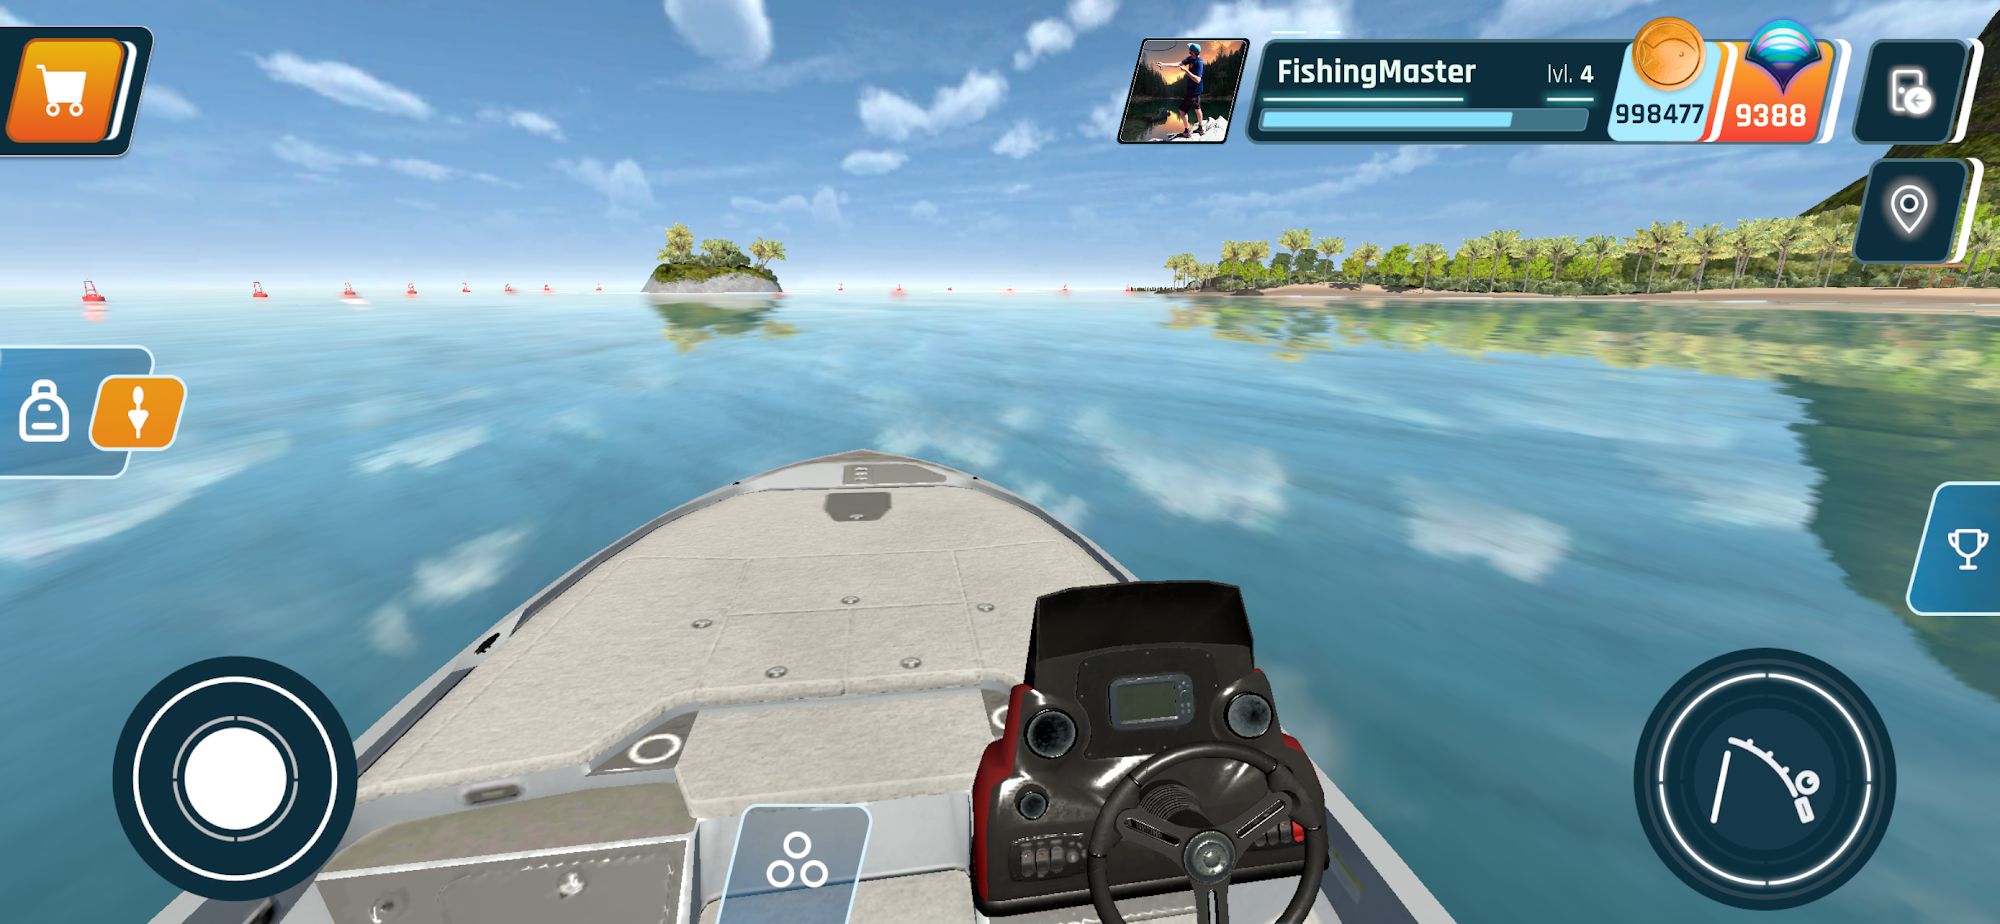 Download Ultimate Fishing Mobile für Android A.n.d.r.o.i.d. .5...0. .a.n.d. .m.o.r.e kostenlos.